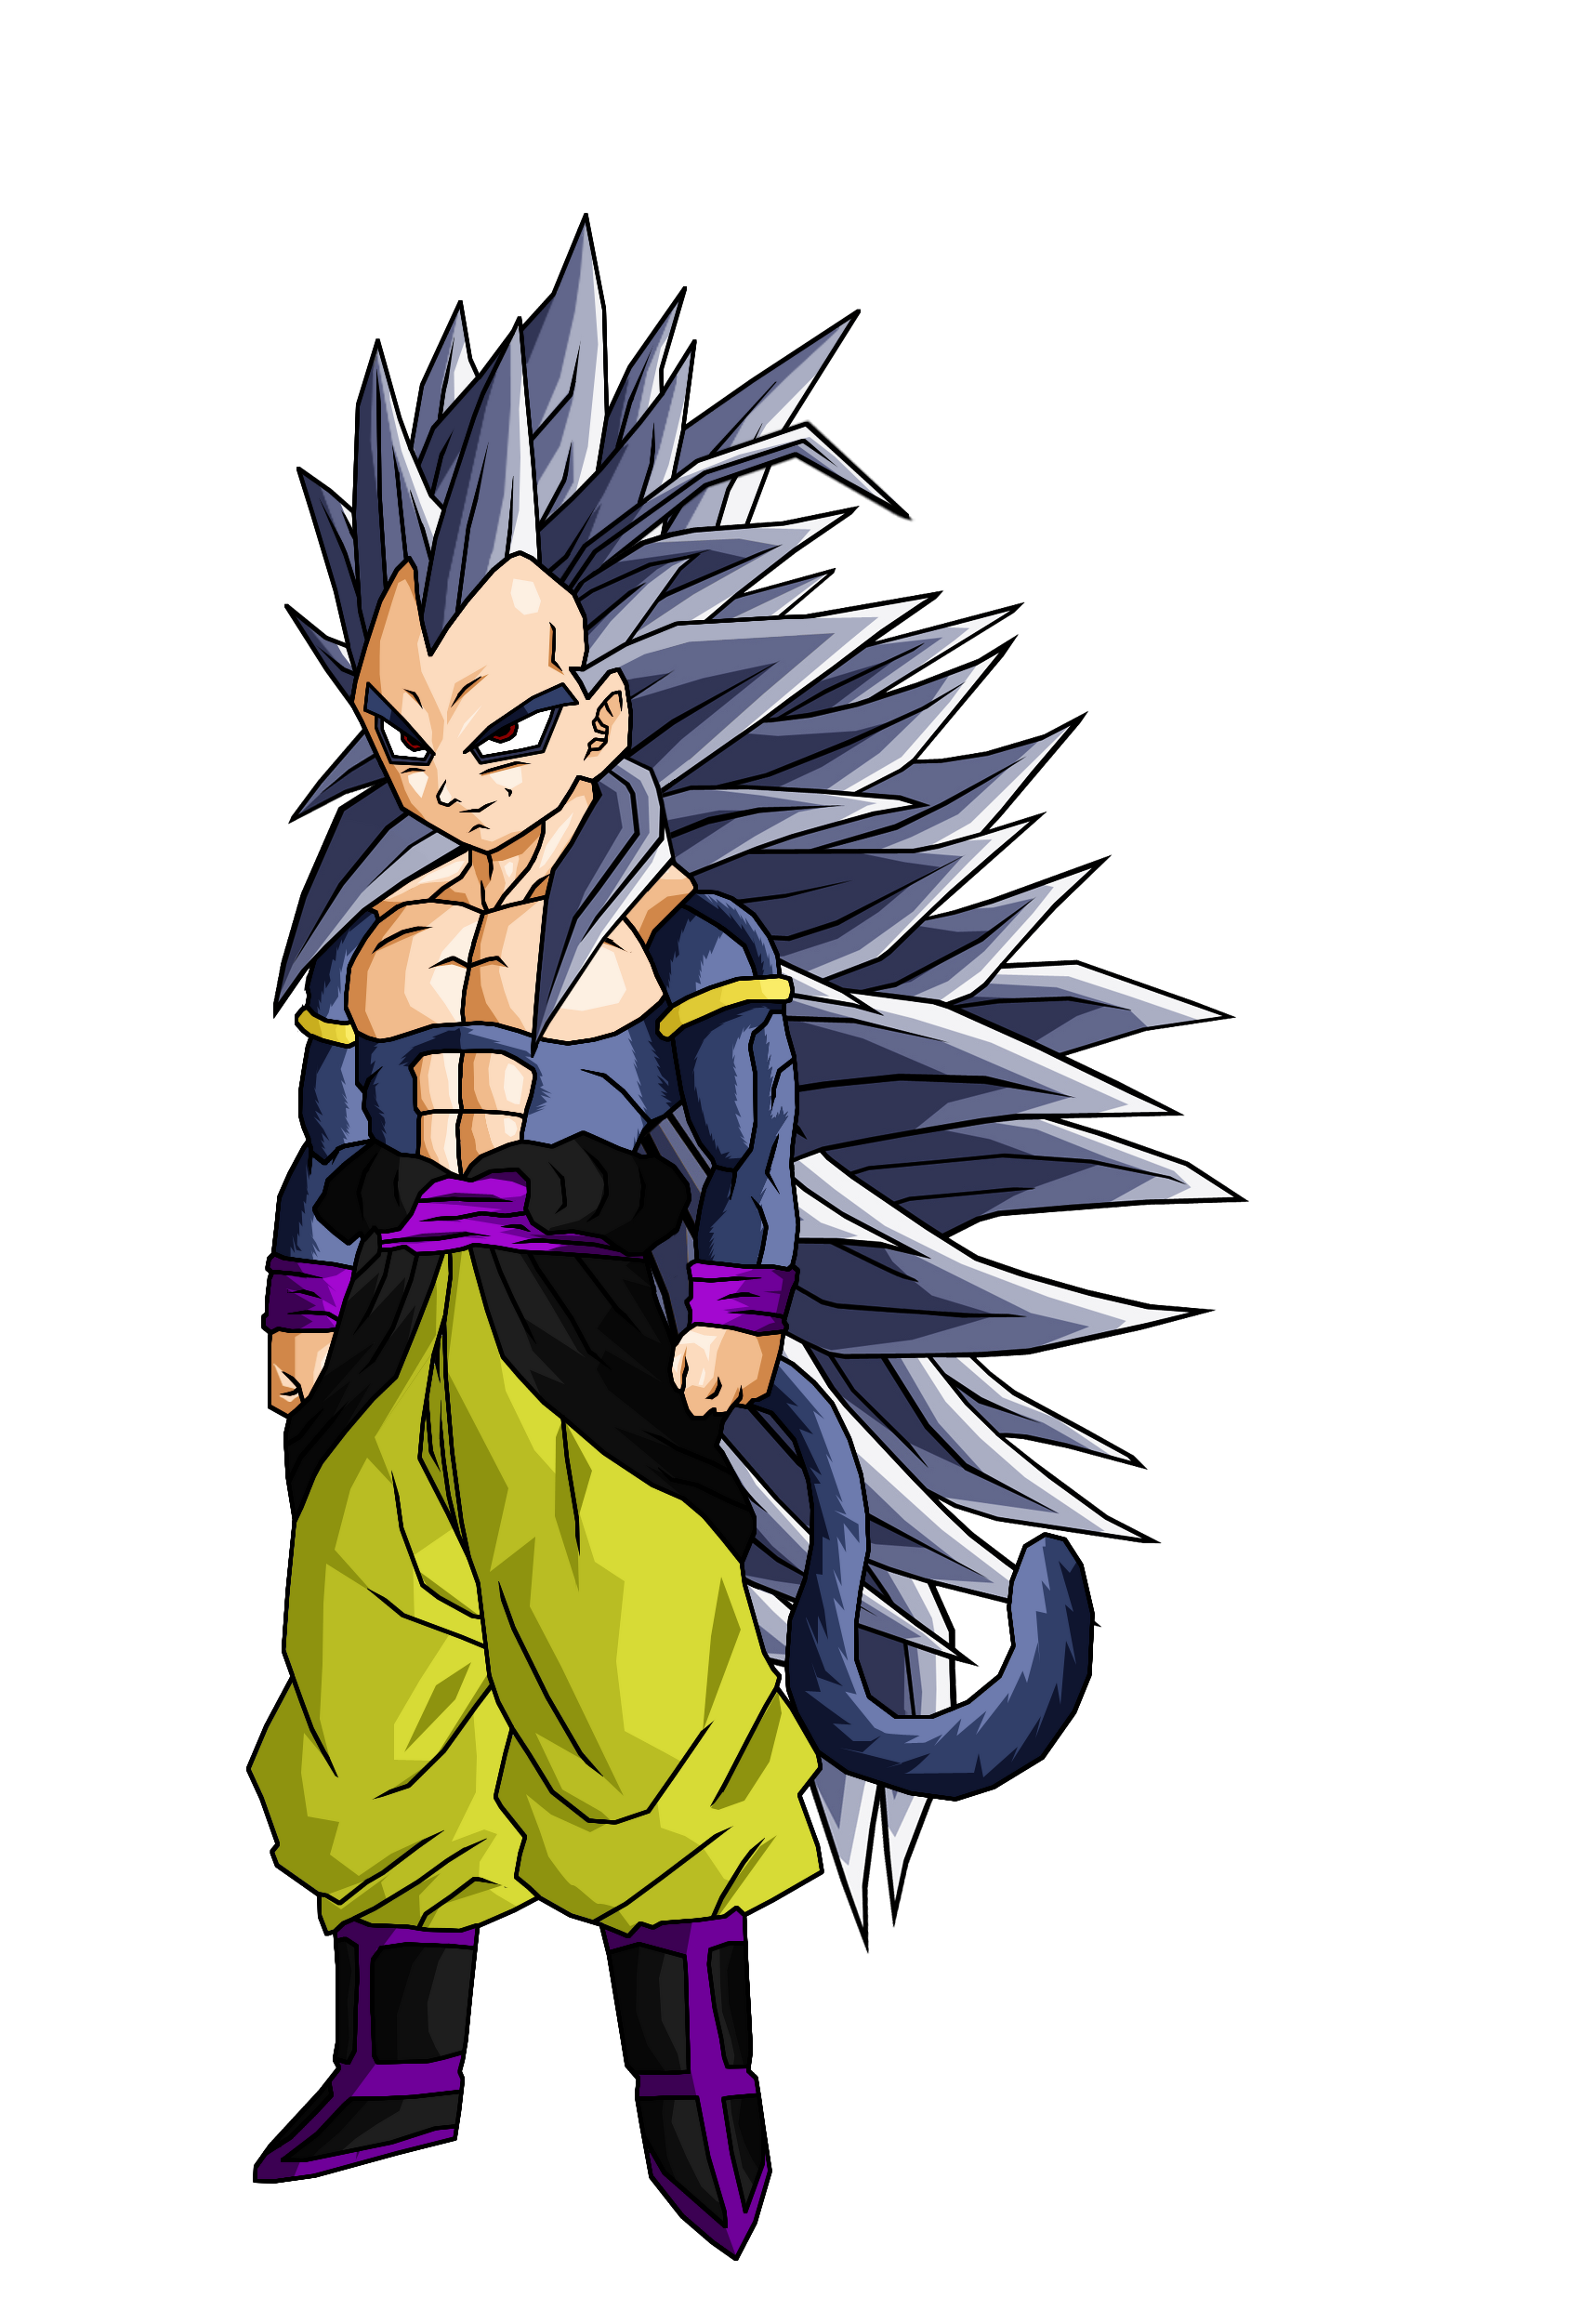 Son Goku - Do you remember? This is how SSJ5 supposed to look like